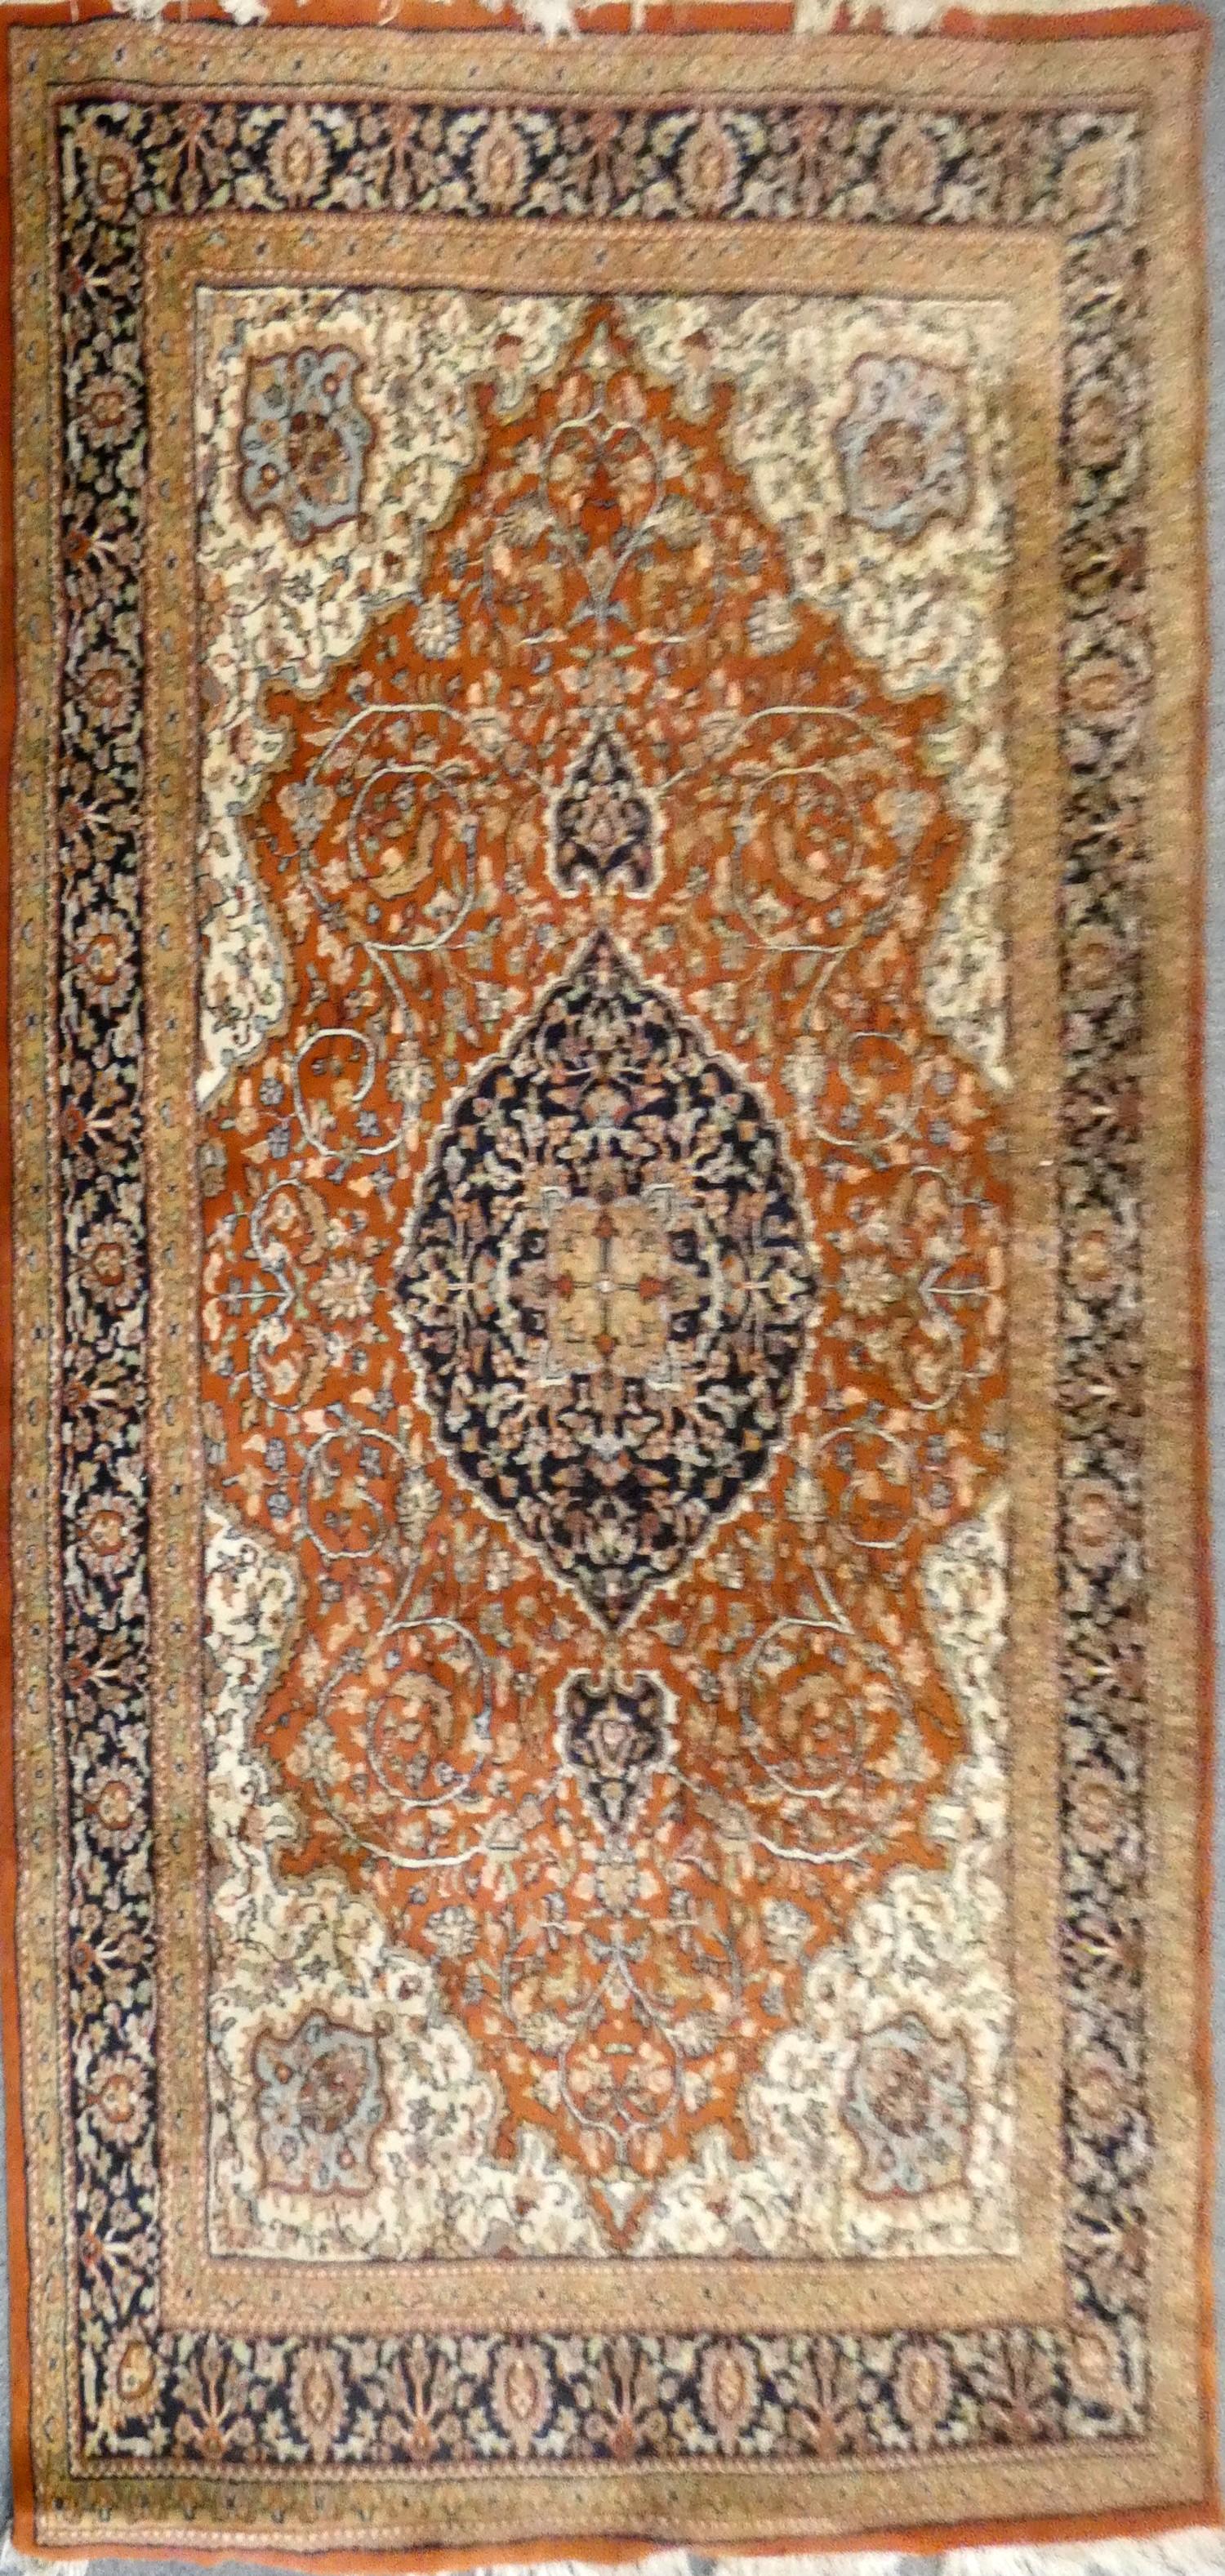 A Persian Jaipur wool rug, with burnt orange and black field, 275 x 185 cm